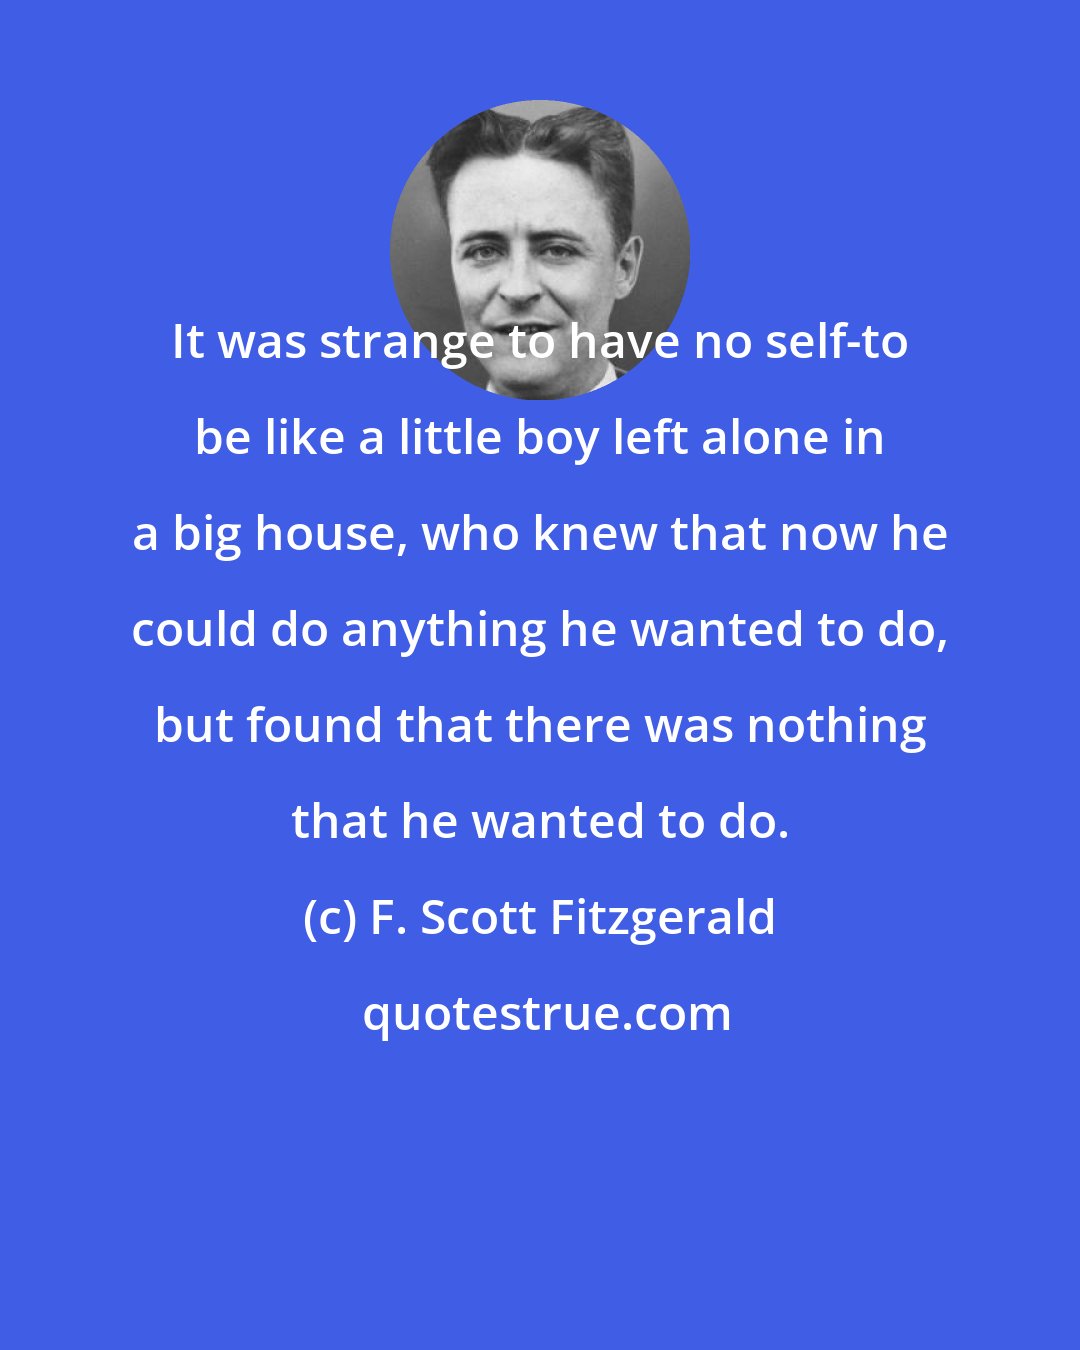 F. Scott Fitzgerald: It was strange to have no self-to be like a little boy left alone in a big house, who knew that now he could do anything he wanted to do, but found that there was nothing that he wanted to do.